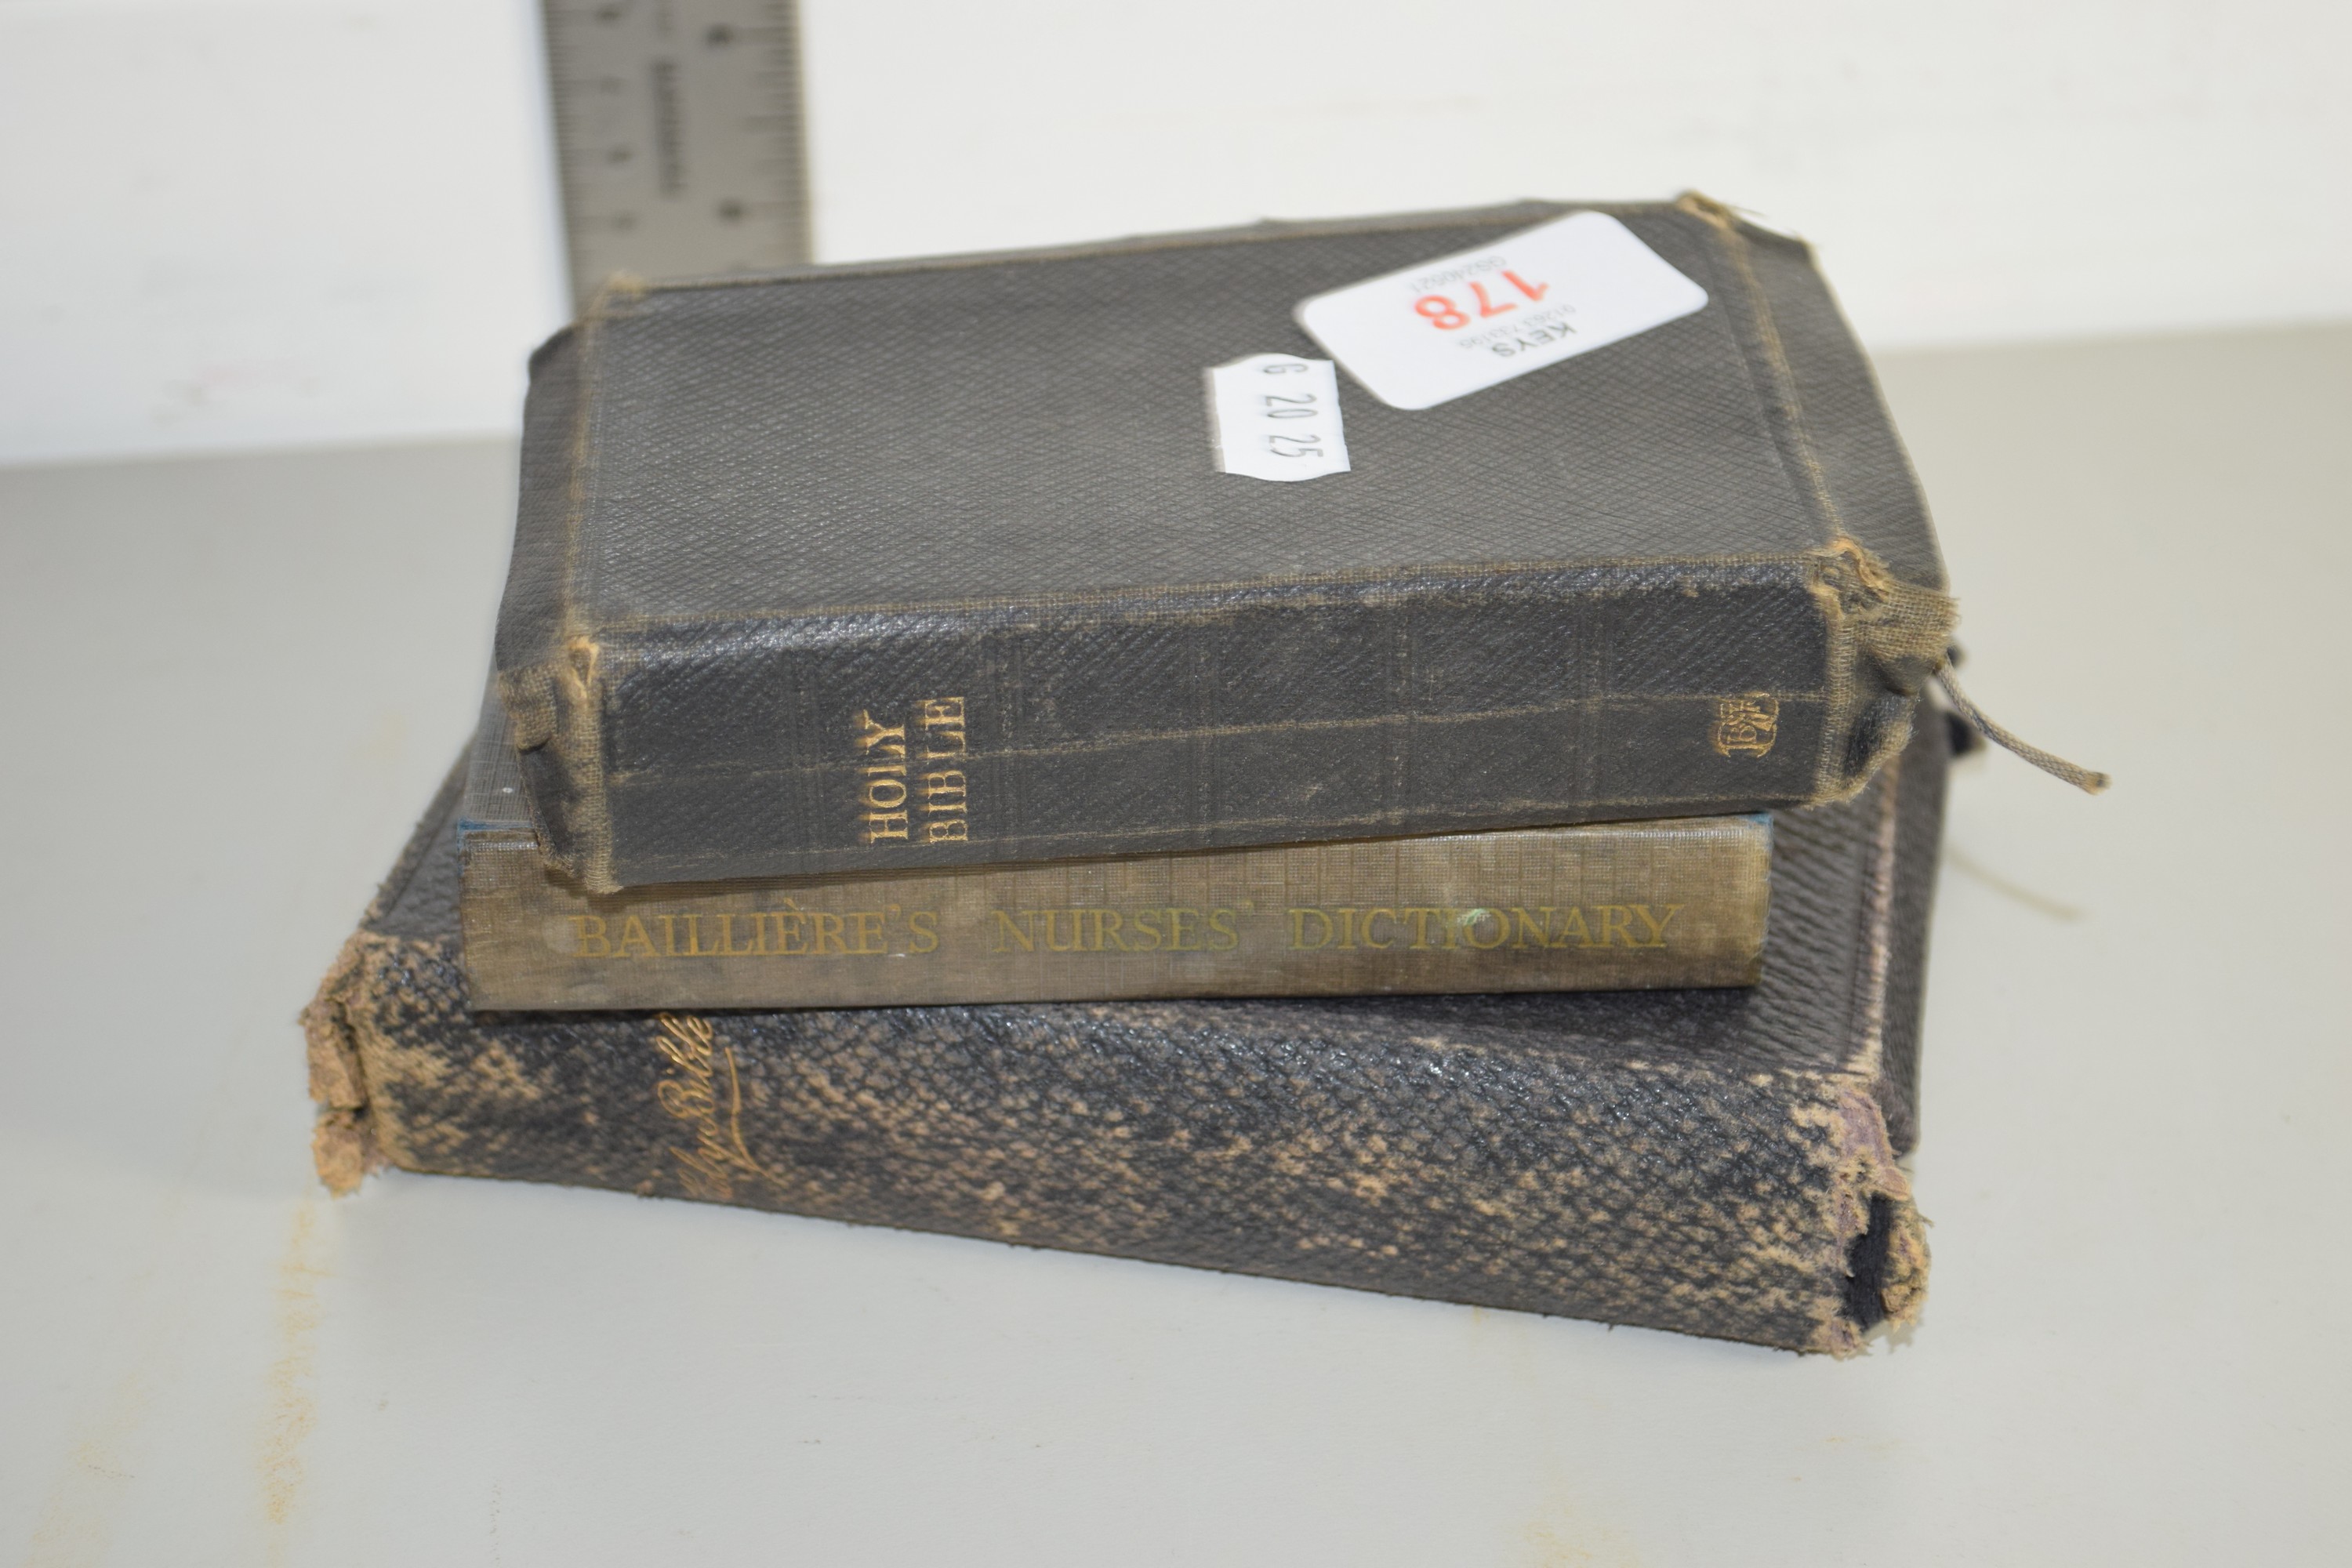 SMALL VERSION OF THE HOLY BIBLE WITH INSCRIPTION DATED 1924, COMPLETE MEDICAL DICTIONARY AND A - Image 2 of 2